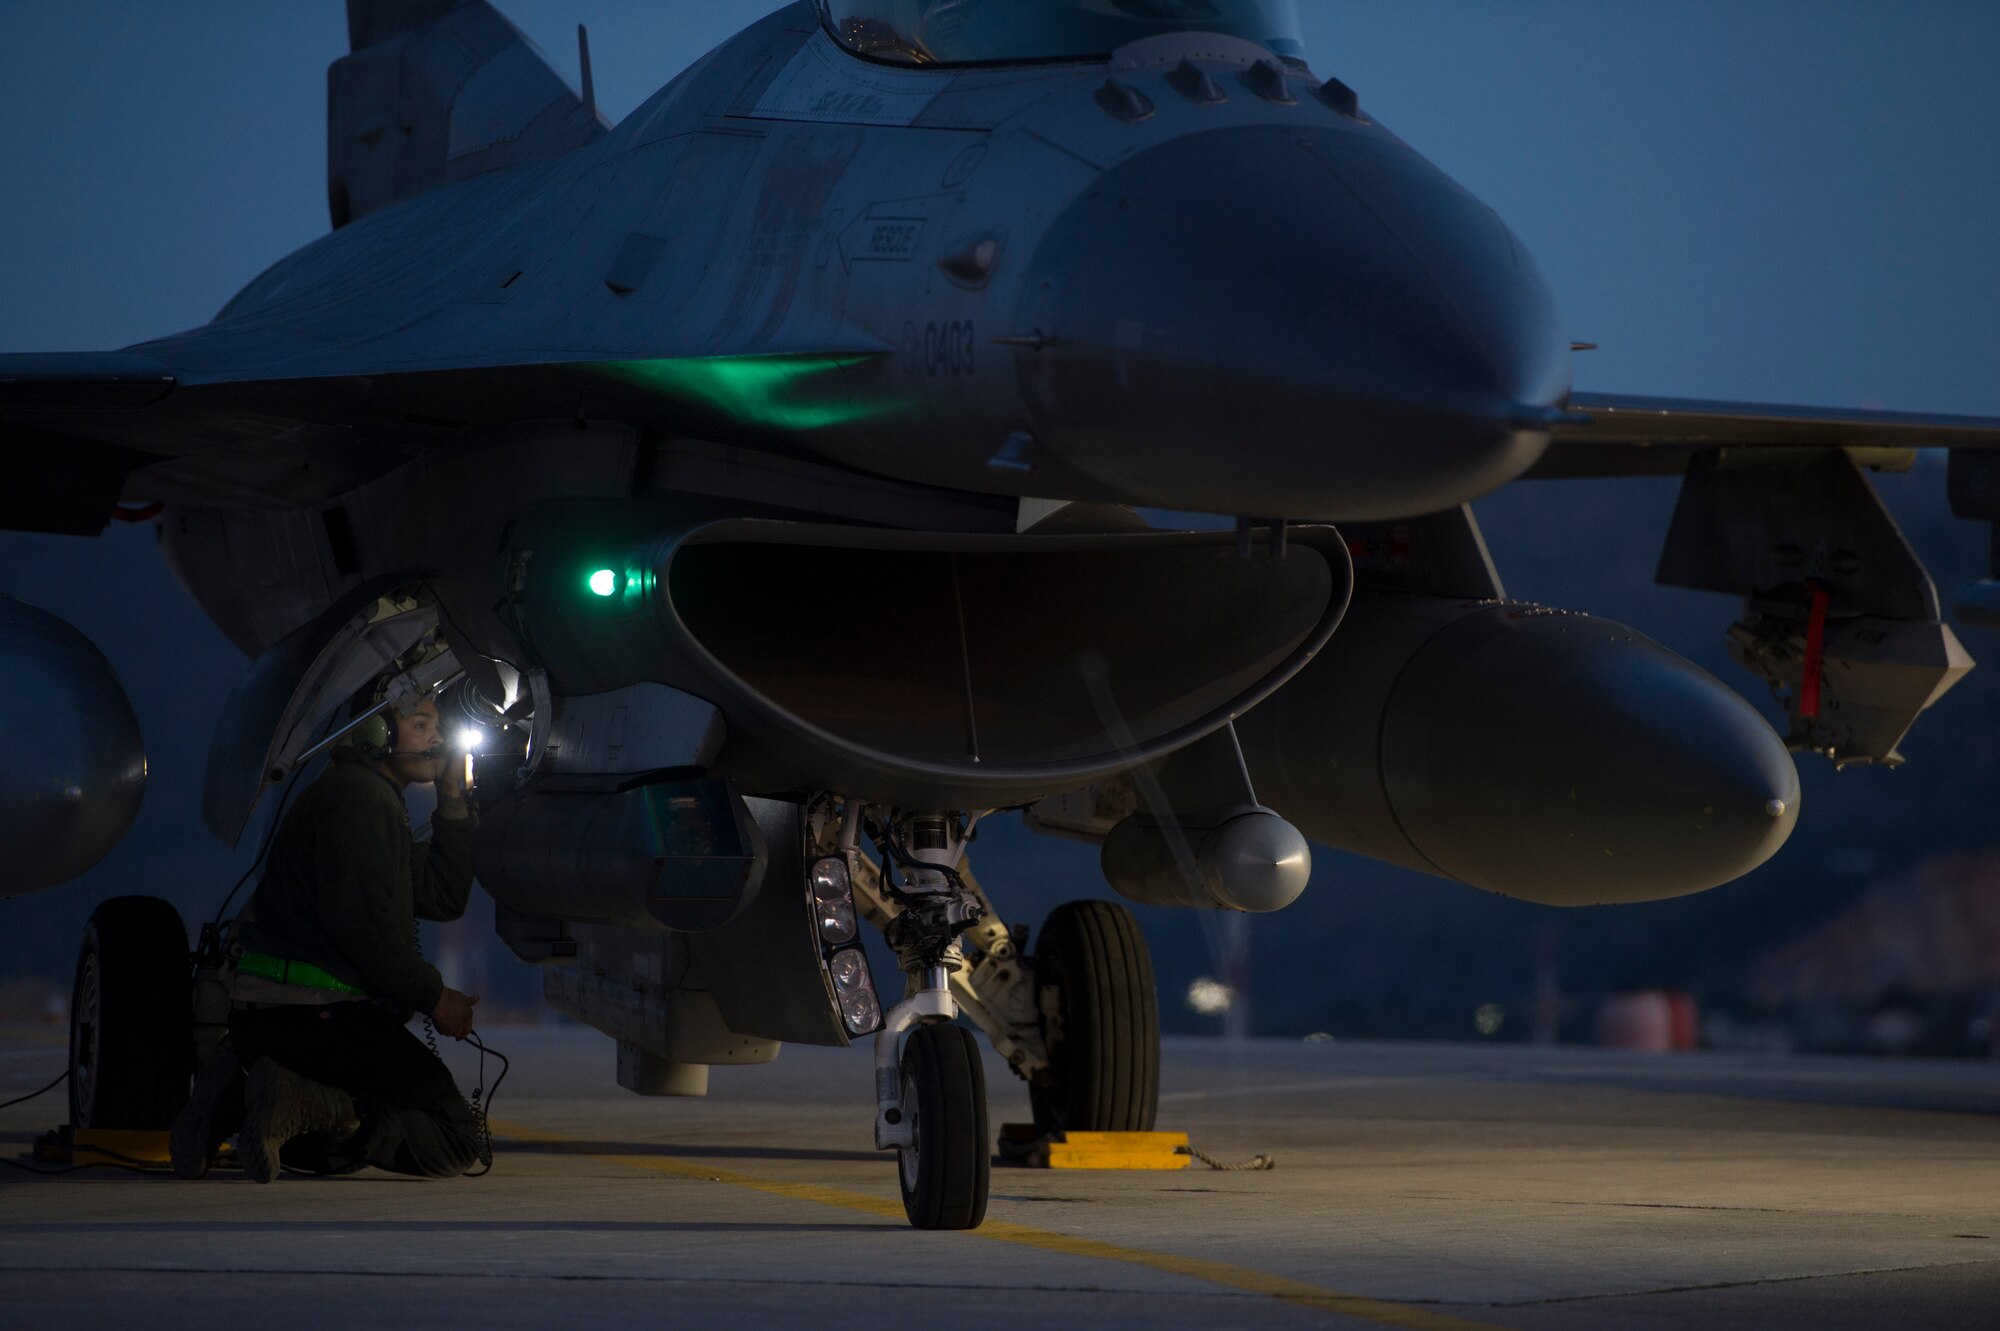 A U.S. Air Force crew chief assigned to the 480th Expeditionary Fighter Squadron performs pre-flight checks on an F-16 Fighting Falcon fighter aircraft before departure during a flying training deployment at Souda Bay, Greece, Feb. 1. 2016. Approximately 300 personnel and 18 F-16s from the 52nd Fighter Wing at Spangdahlem Air Base, Germany, will support the FTD as part of U.S. Air Forces in Europe-Air Forces Africa's Forward Ready Now stance. (U.S. Air Force photo by Staff Sgt. Christopher Ruano/Released)